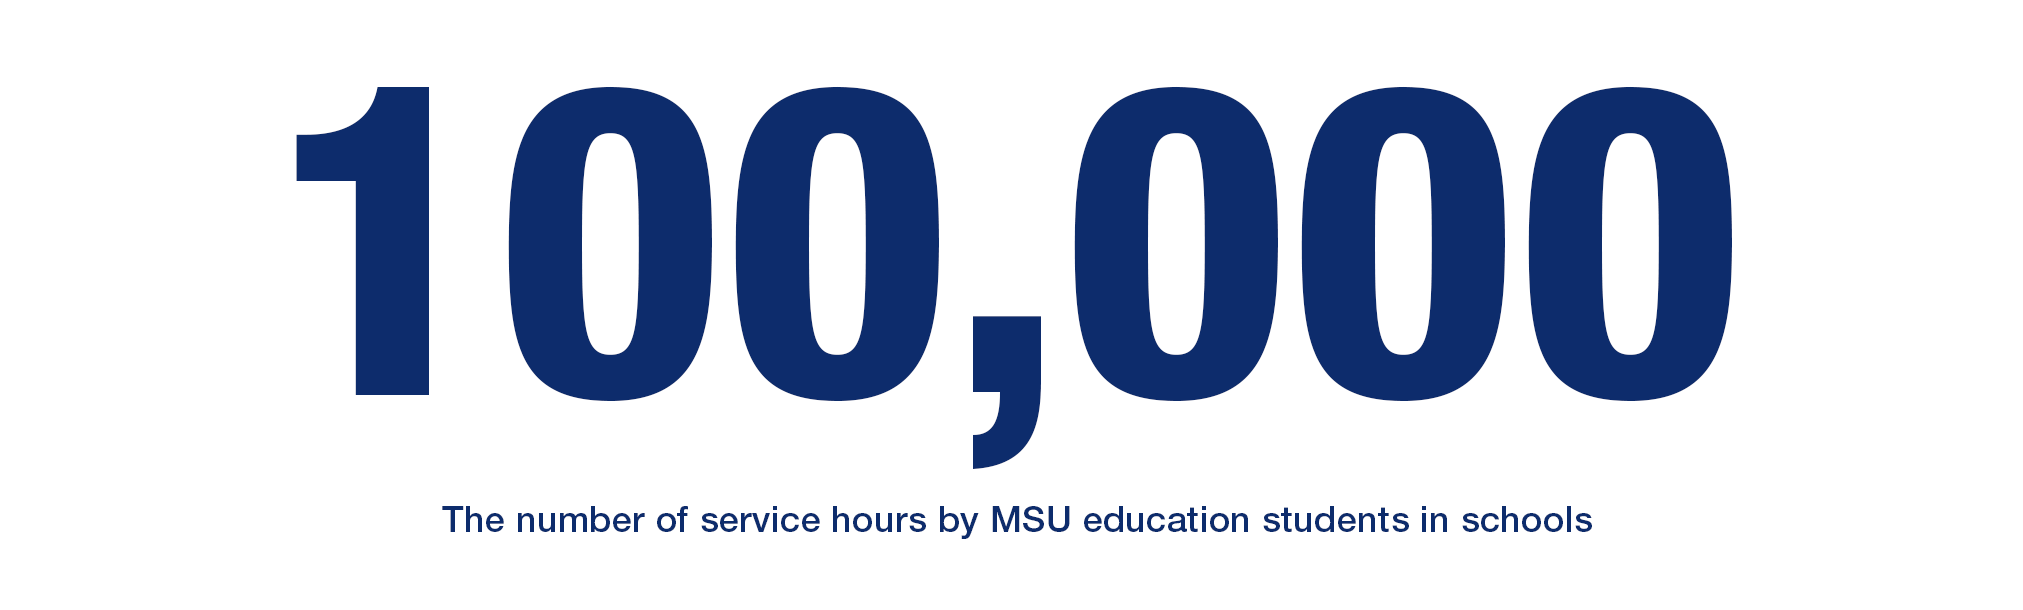 100,000 hours of service by MSU education students in school